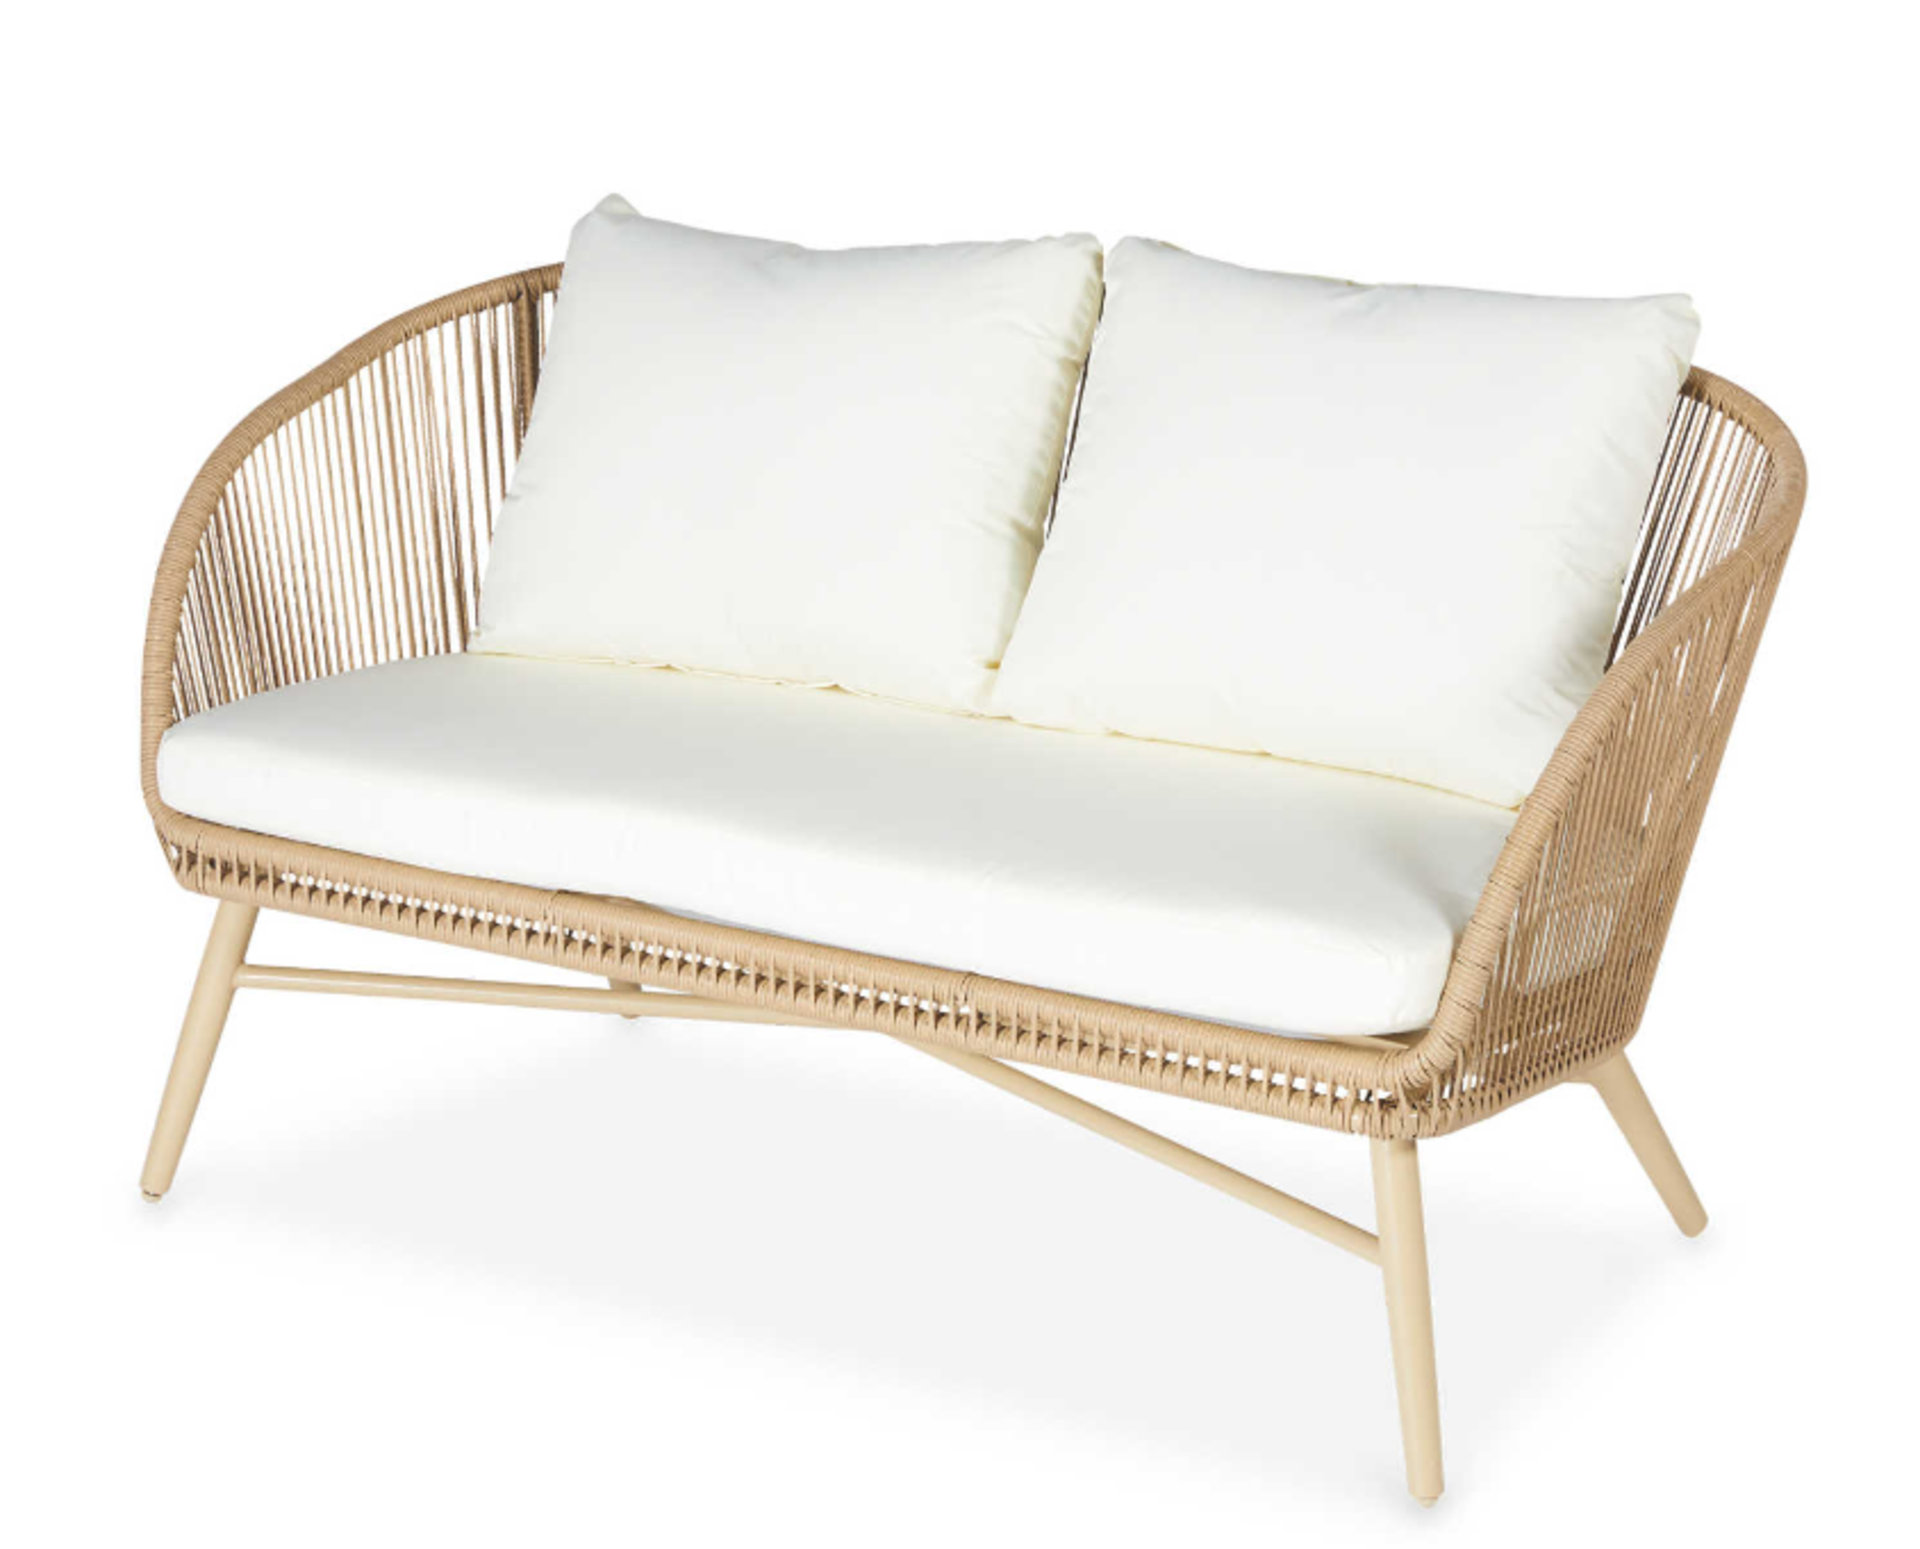 Rope Effect Furniture Set. Enjoy those lazy days in the garden with this comfortable and stylish - Image 3 of 5